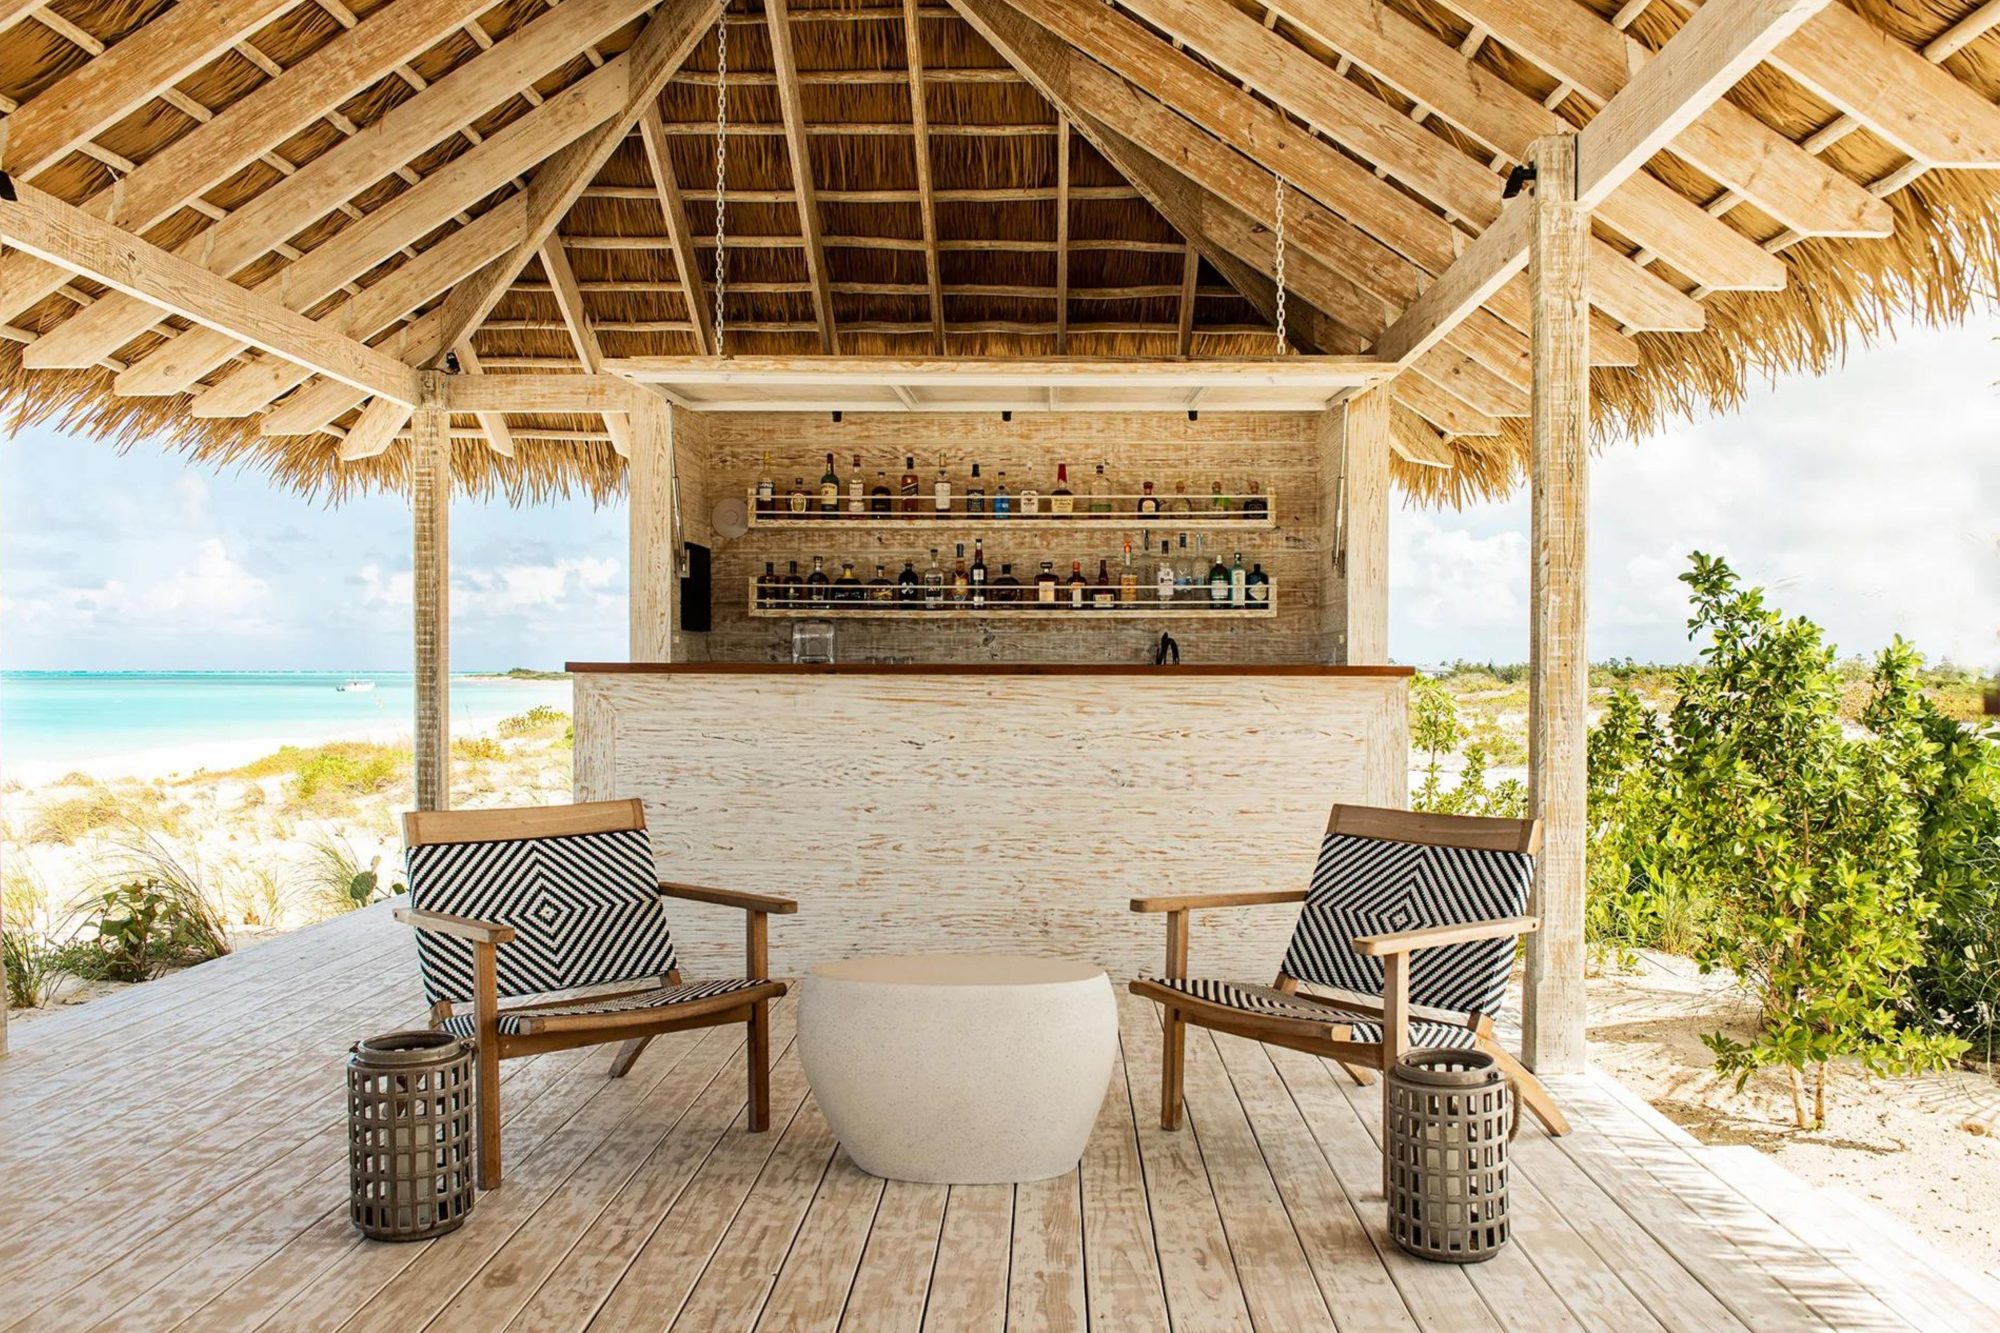 Experience secluded splendor on the shores of Pine Cay in Turks and Caicos